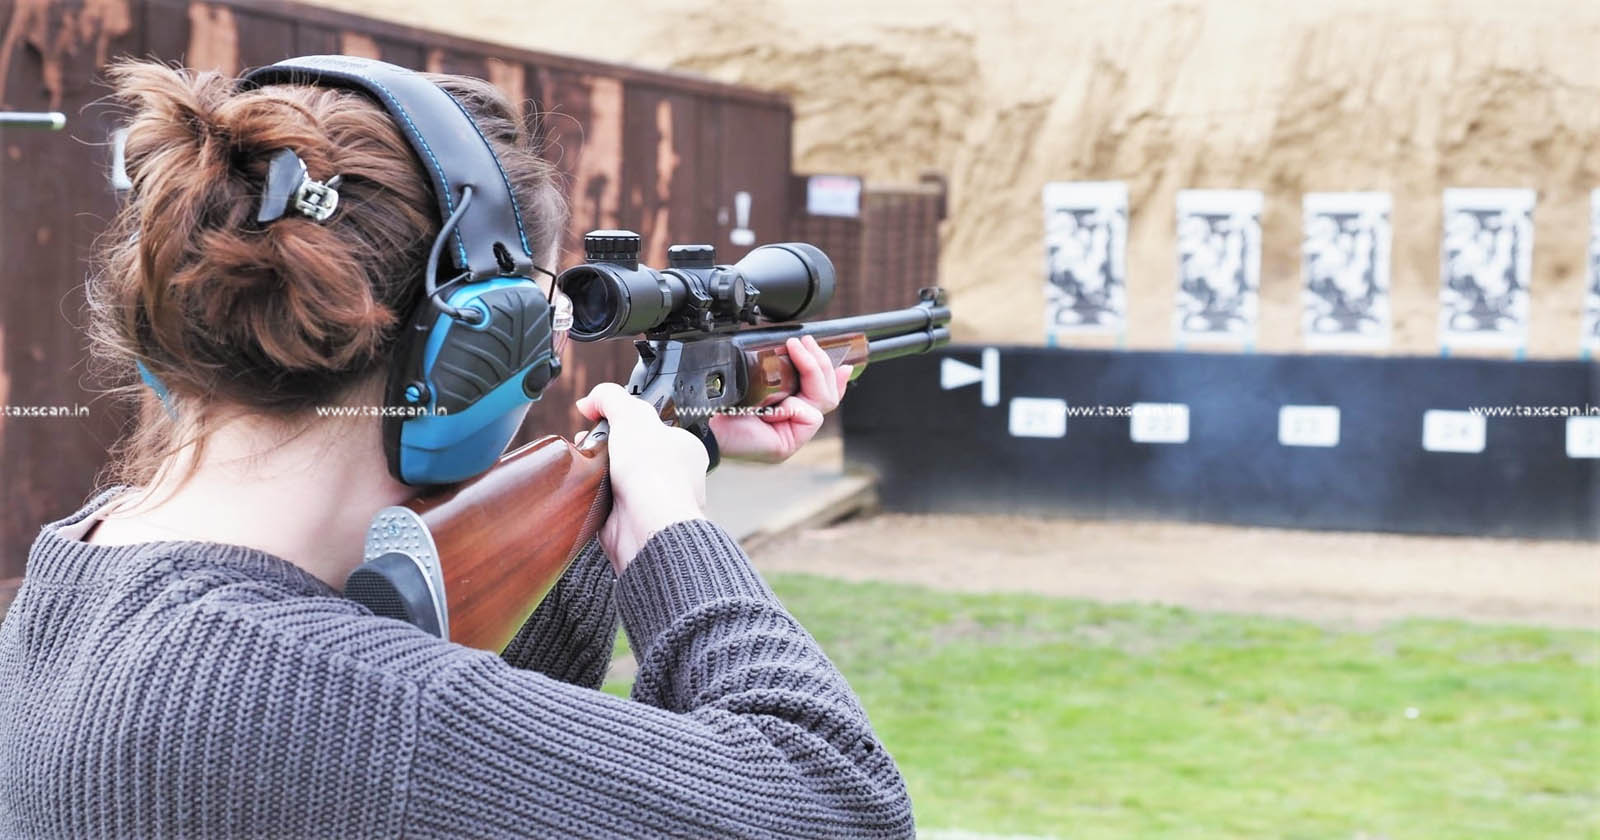 Charging of Fees for conducting Matches or Tournament in Rifle Shooting is Commercial Activity - ITAT grants relief to Haryana Rifle Association -